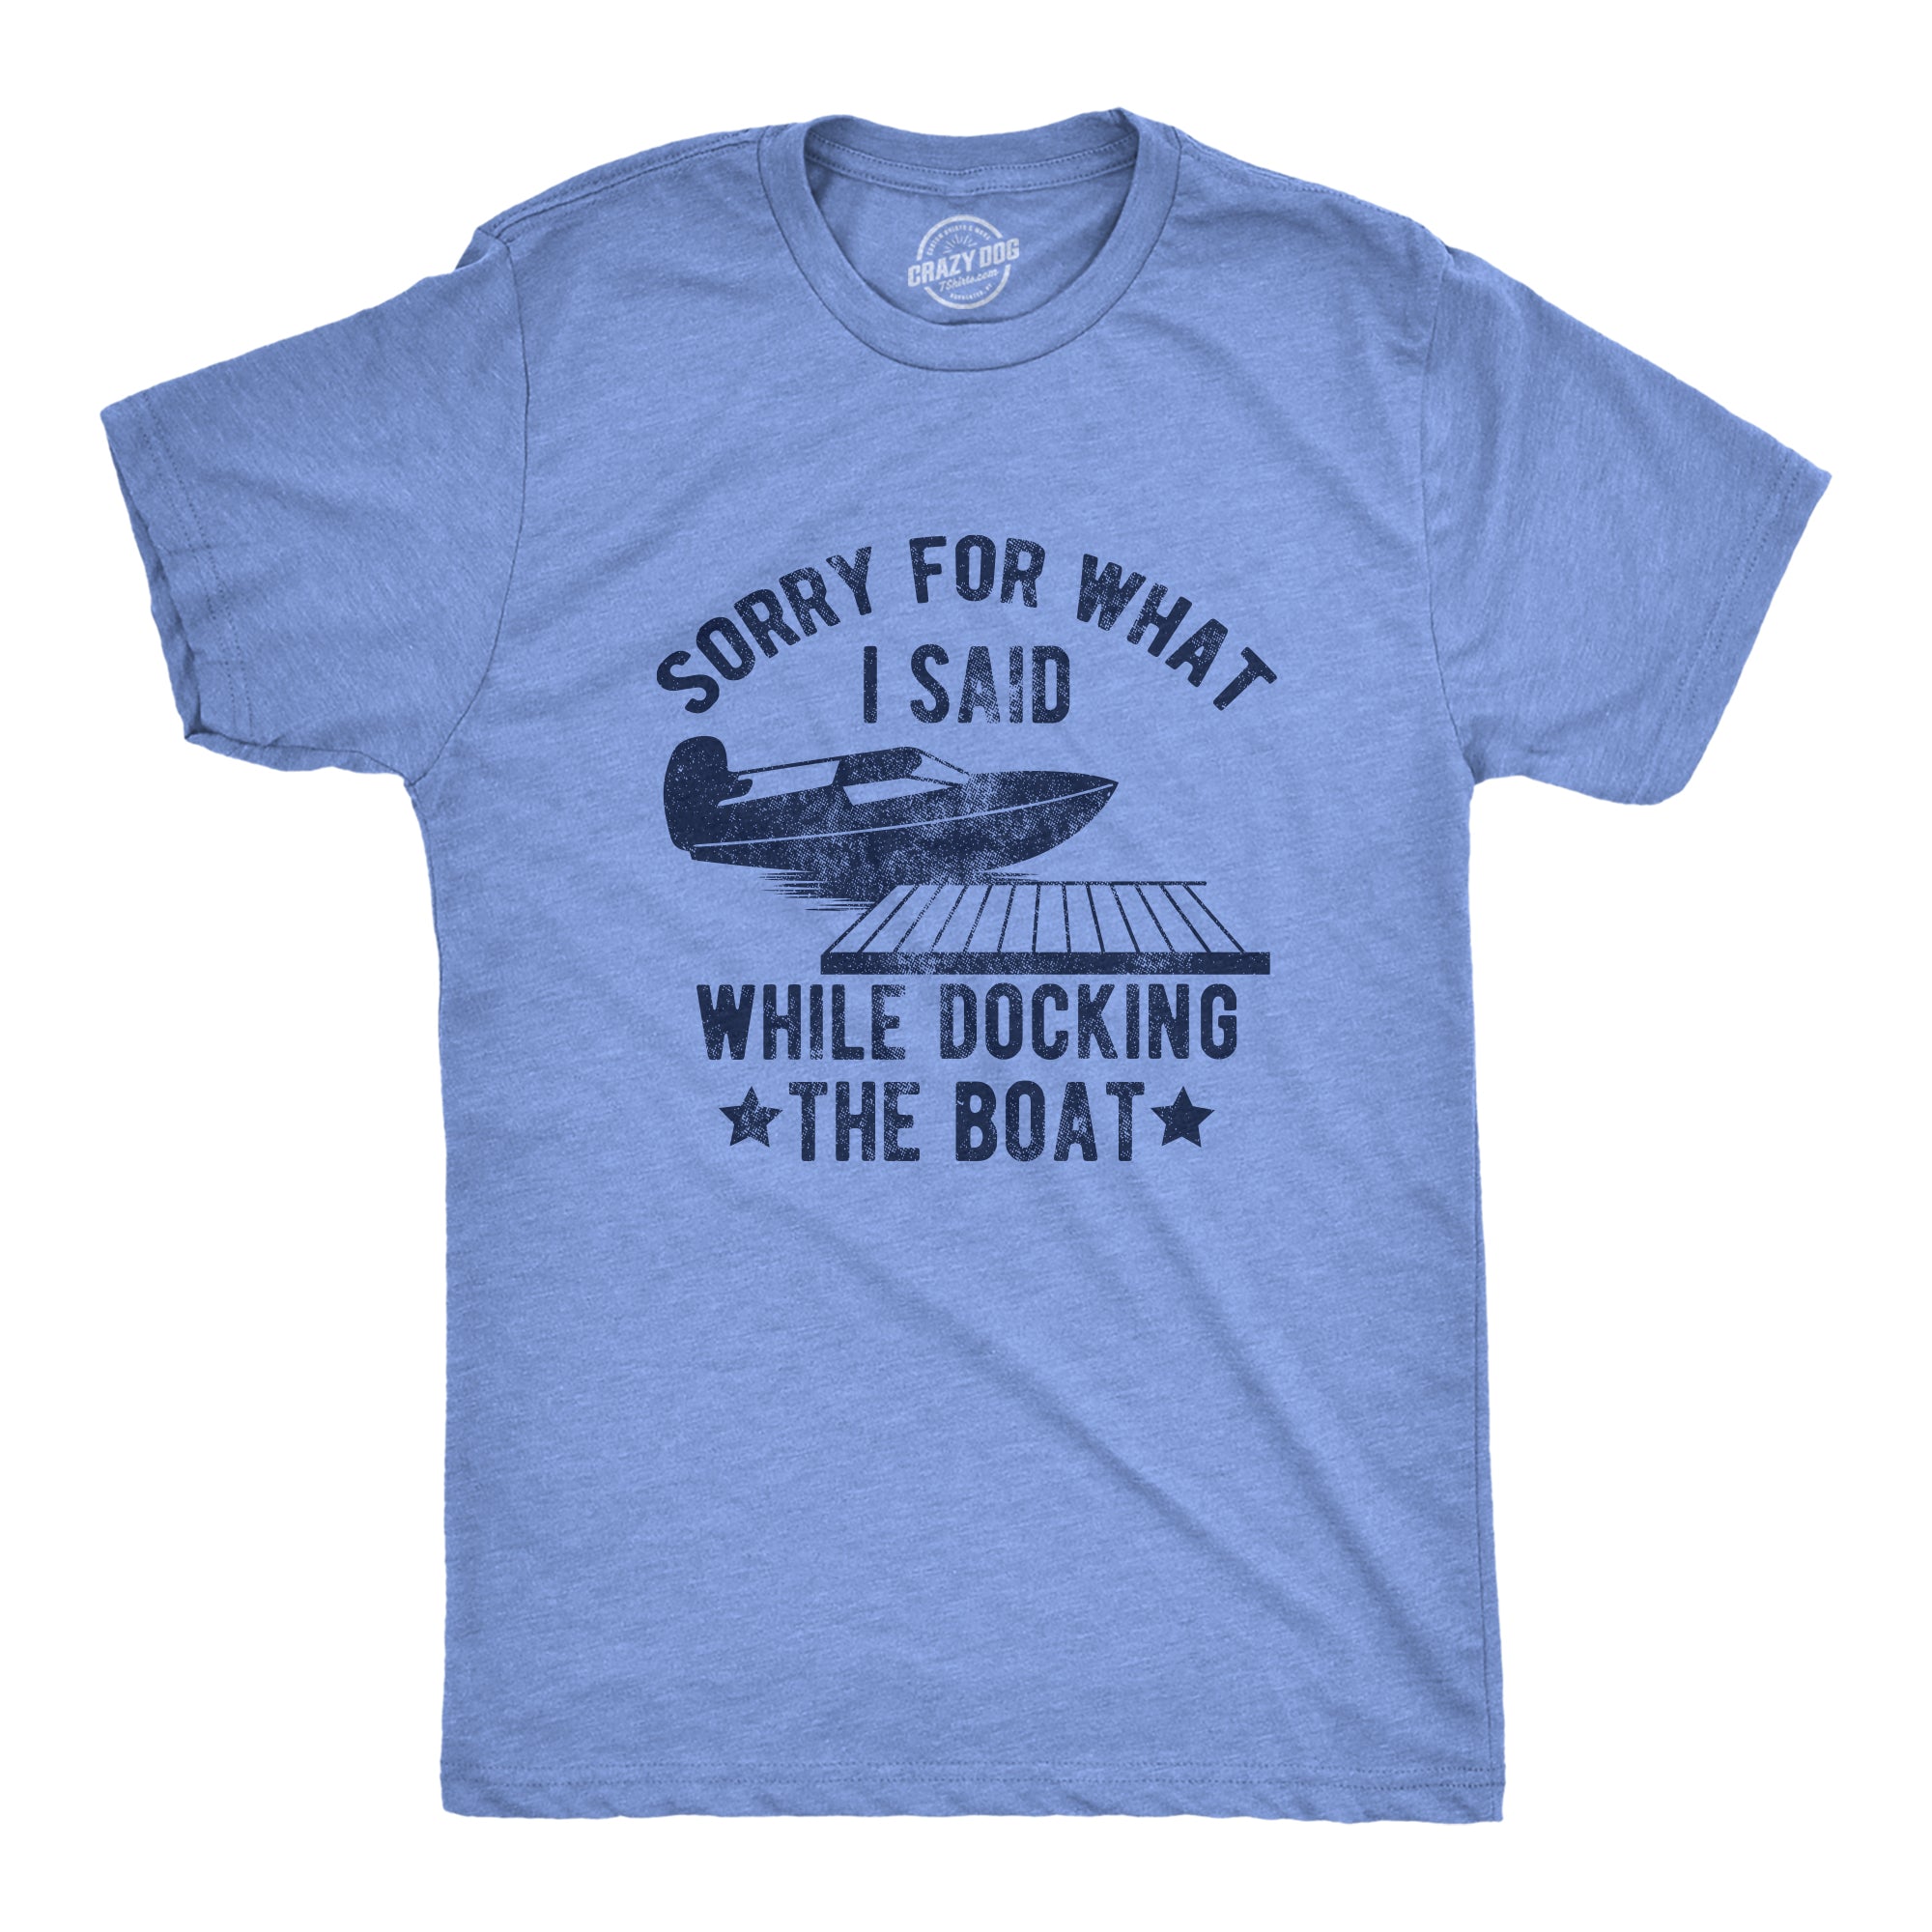 Funny Light Heather Blue - DOCKING Sorry For What I Said While Docking The Boat Mens T Shirt Nerdy Sarcastic Tee